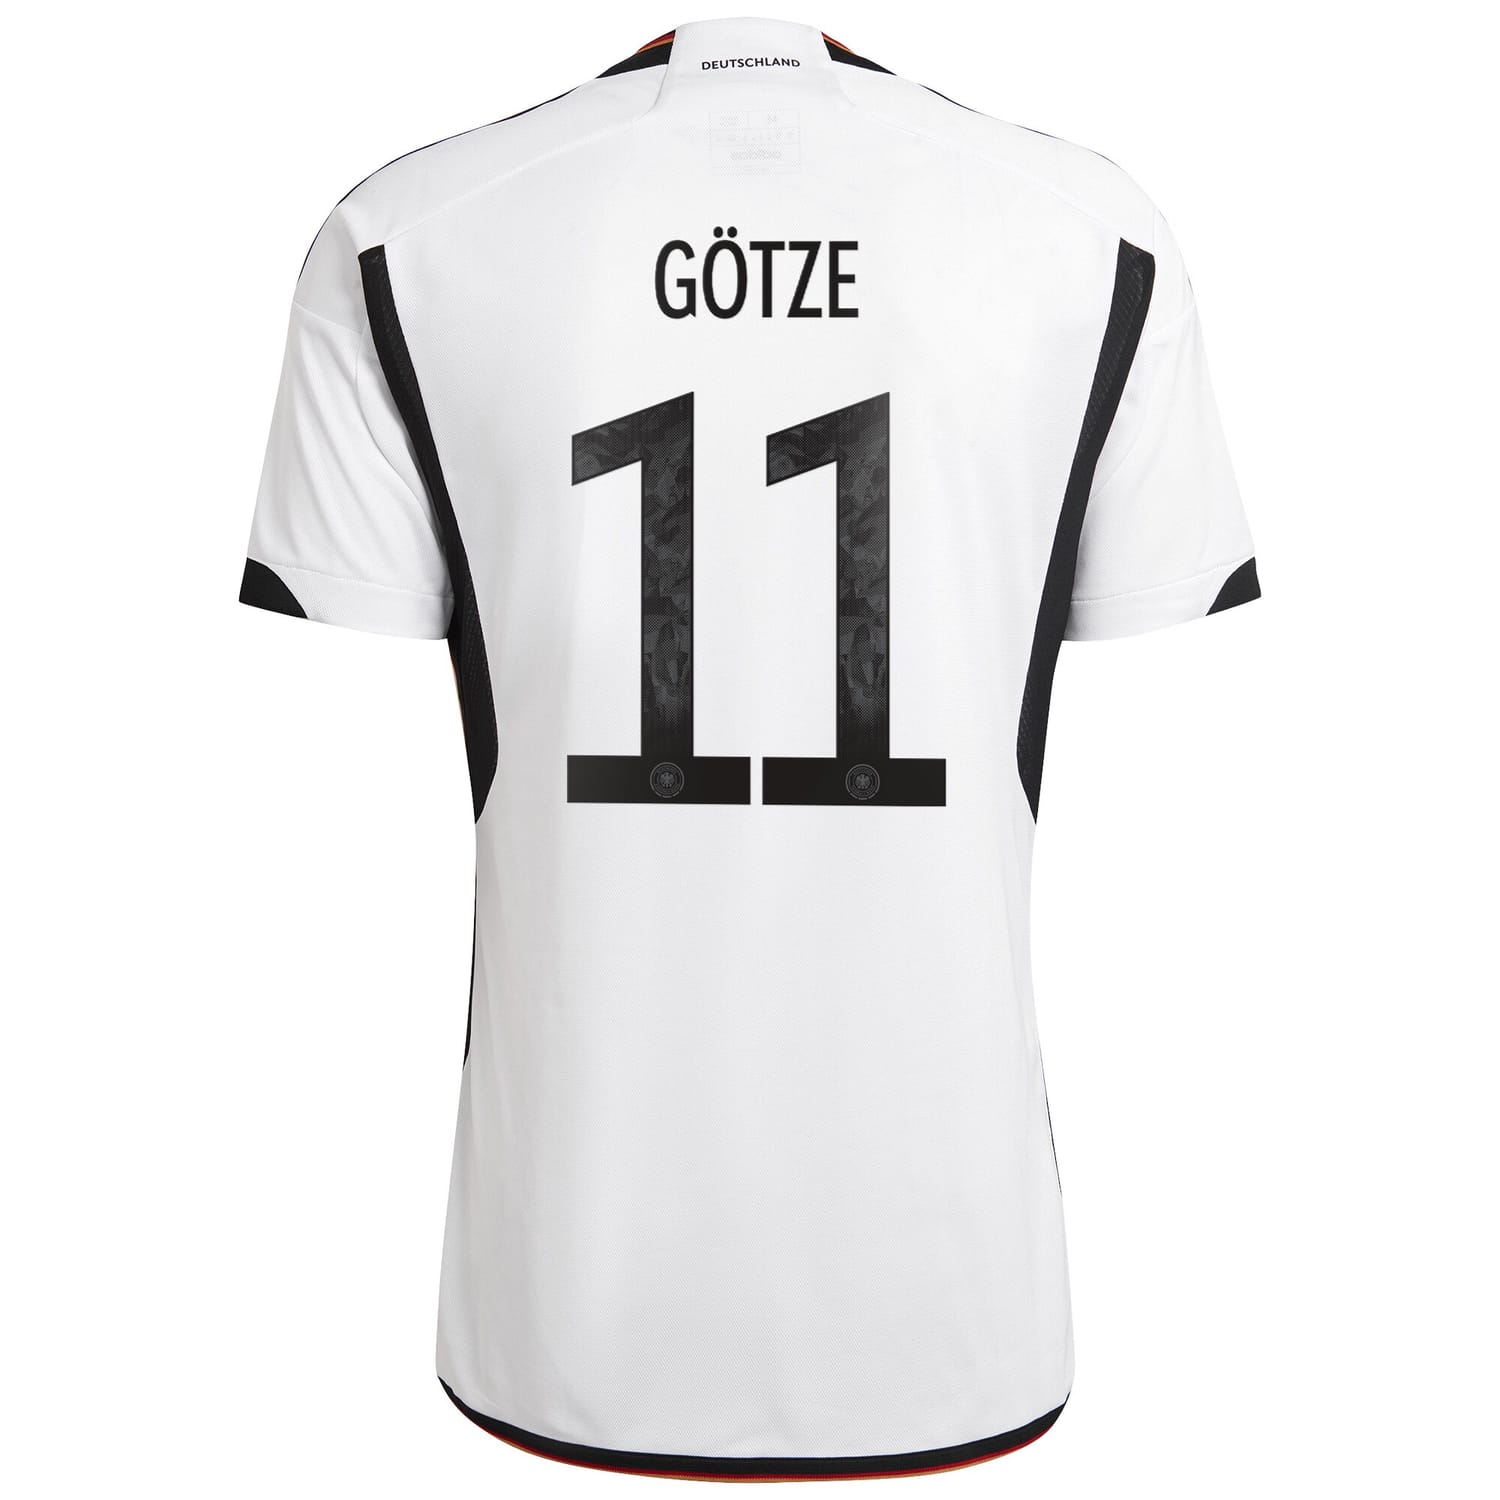 Germany National Team Home Jersey Shirt 2022 player Mario Götze 11 printing for Men